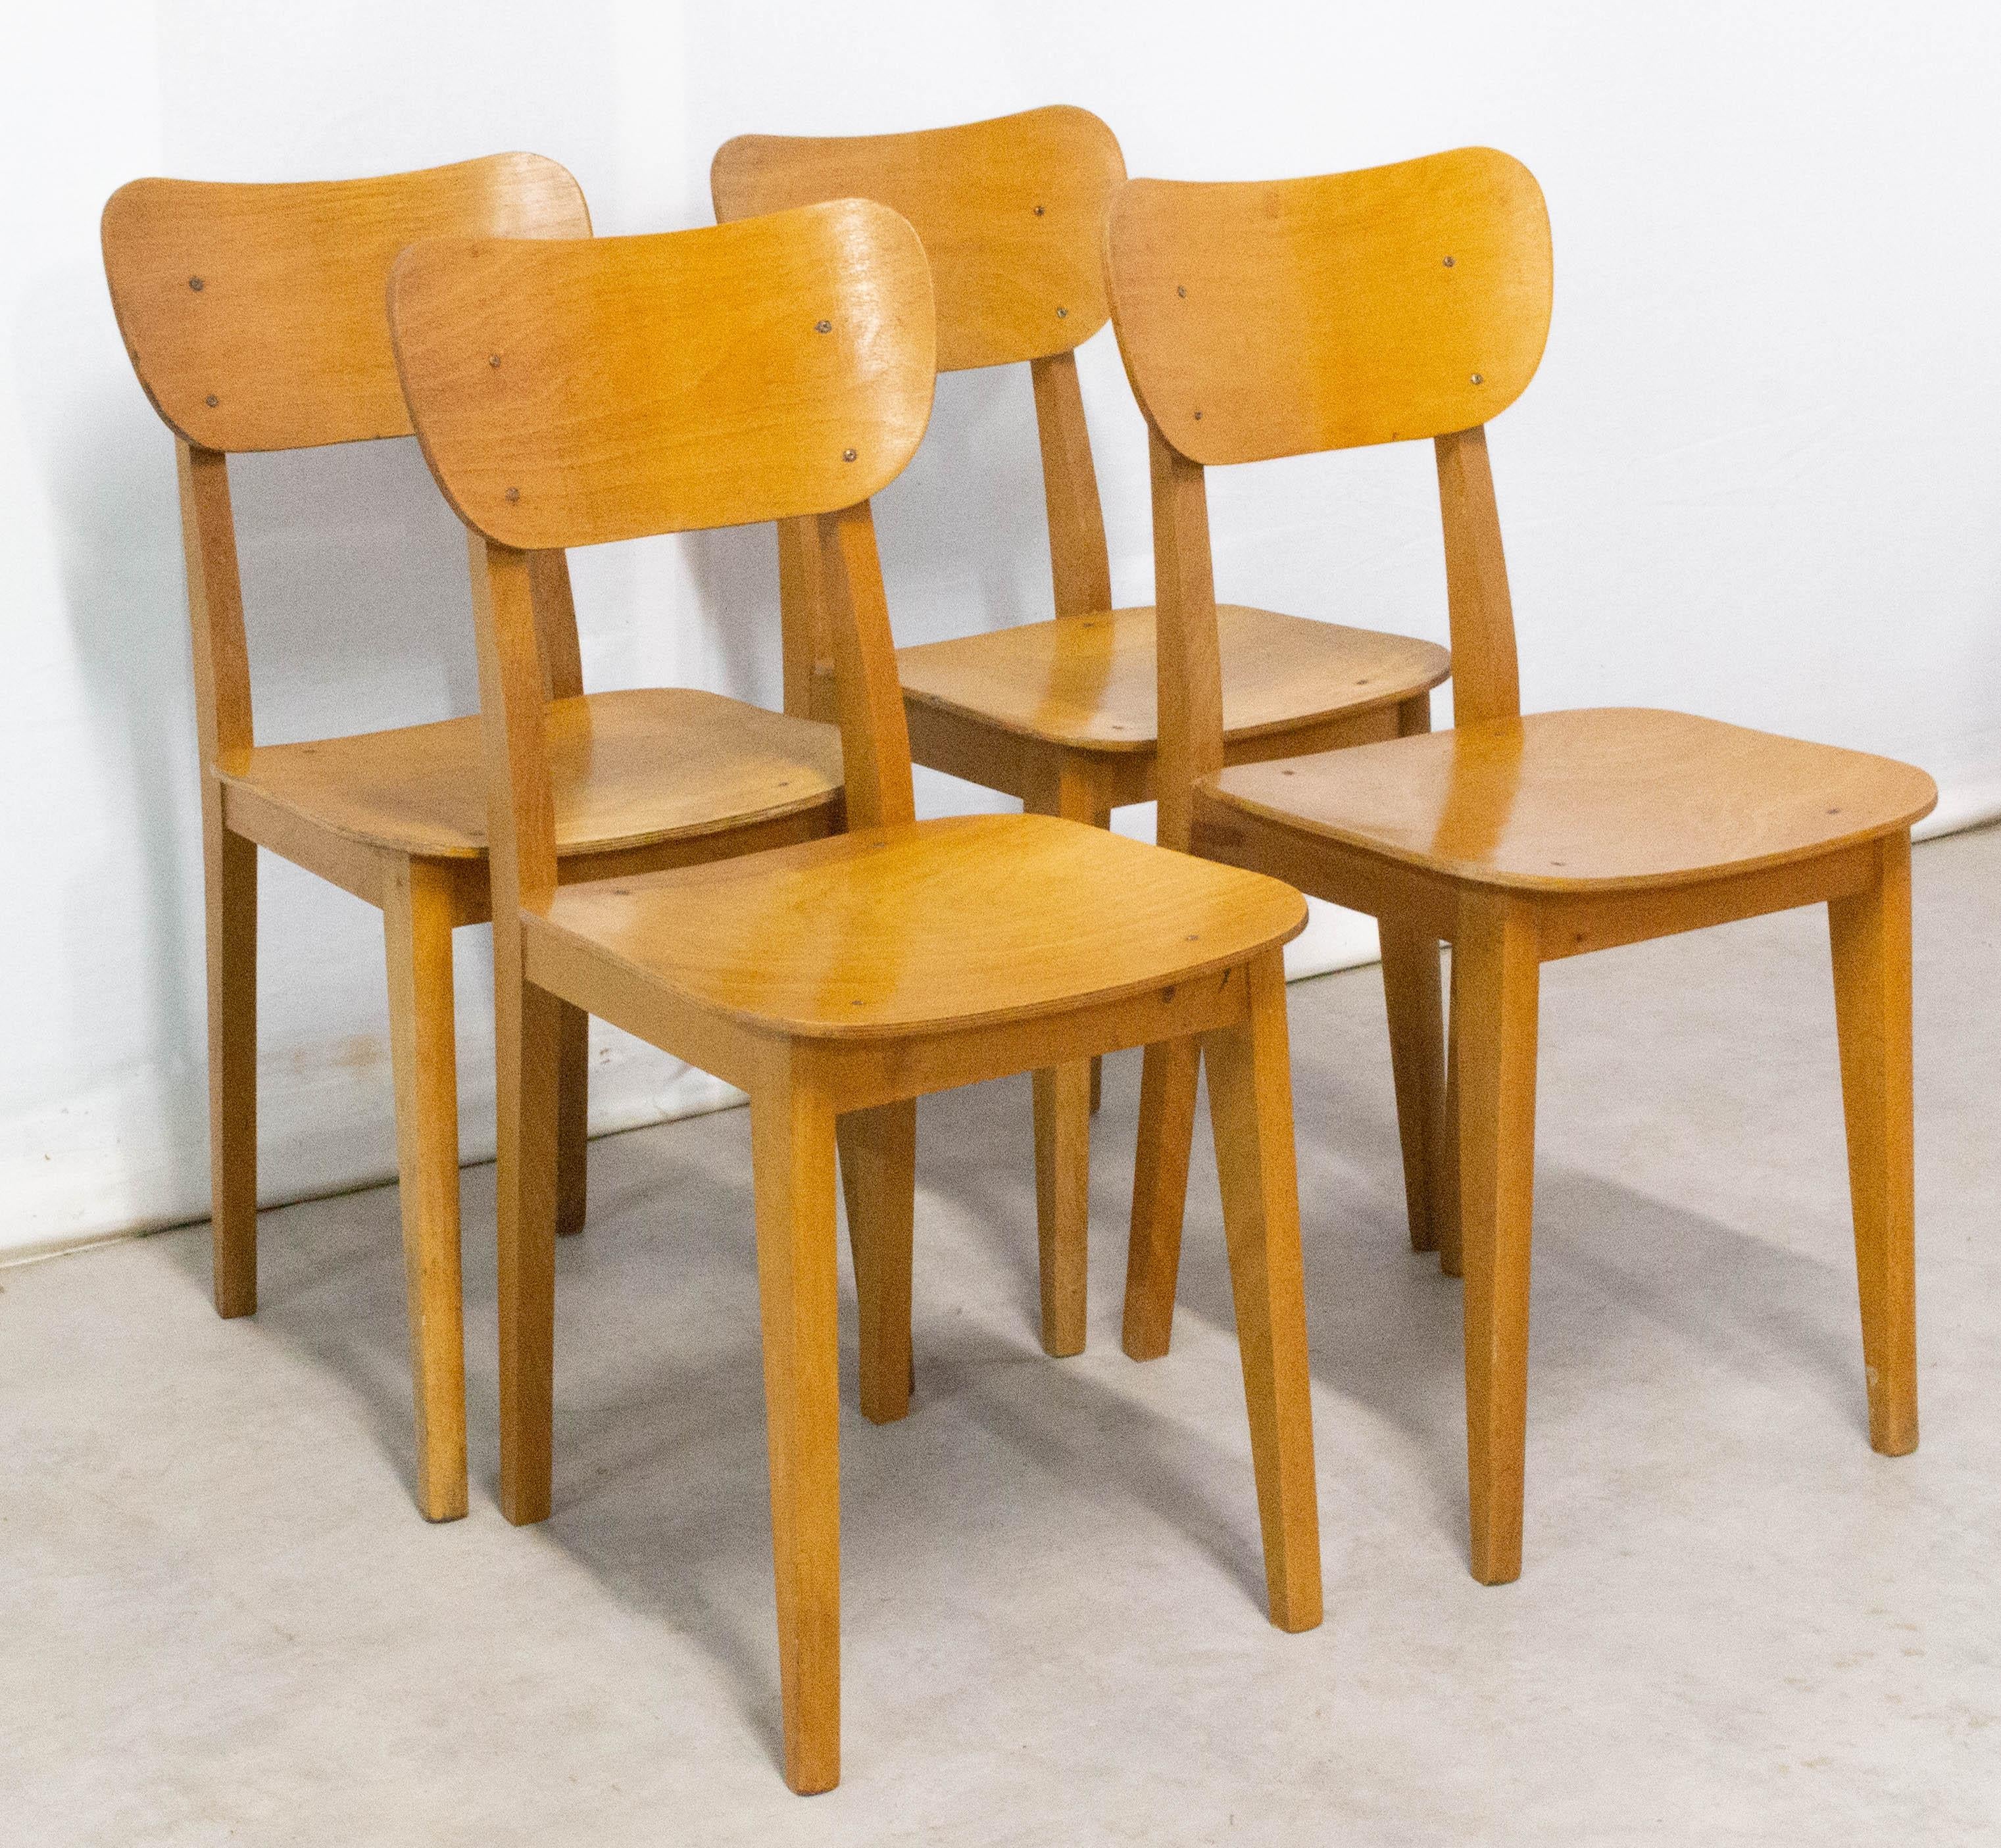 Four French dining chairs, midcentury
Beech
Original vintage condition
Sound and solid.

For shipping: 
2 packs, 39/55/88 kg 8 kg each.